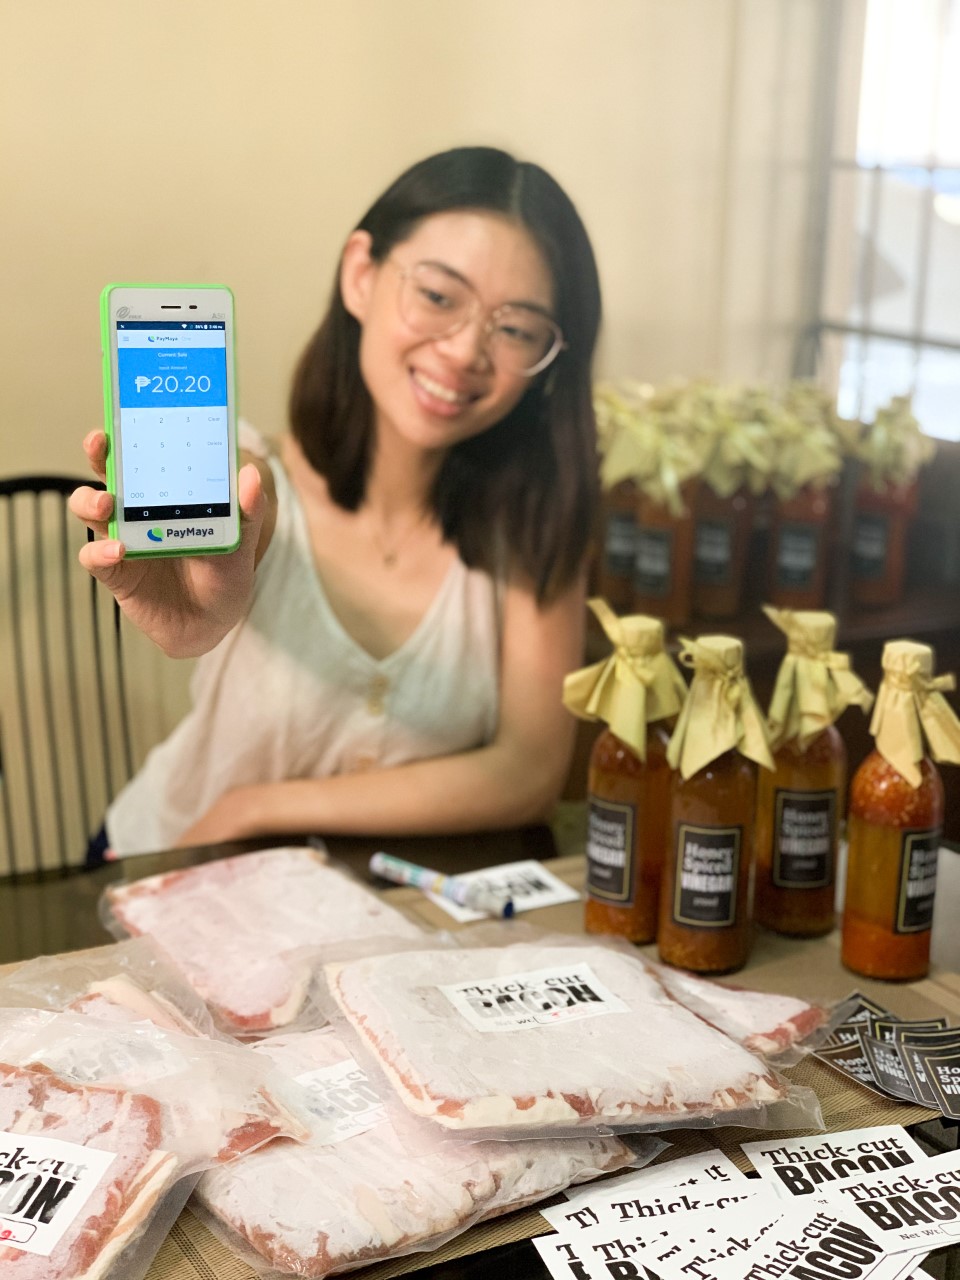 Entrepreneur Charmaine De Leon showcases her store’s PayMaya One Lite device which enables her to accept card and eWallet payments from customers - promoting safer and more convenient transactions in the new normal.